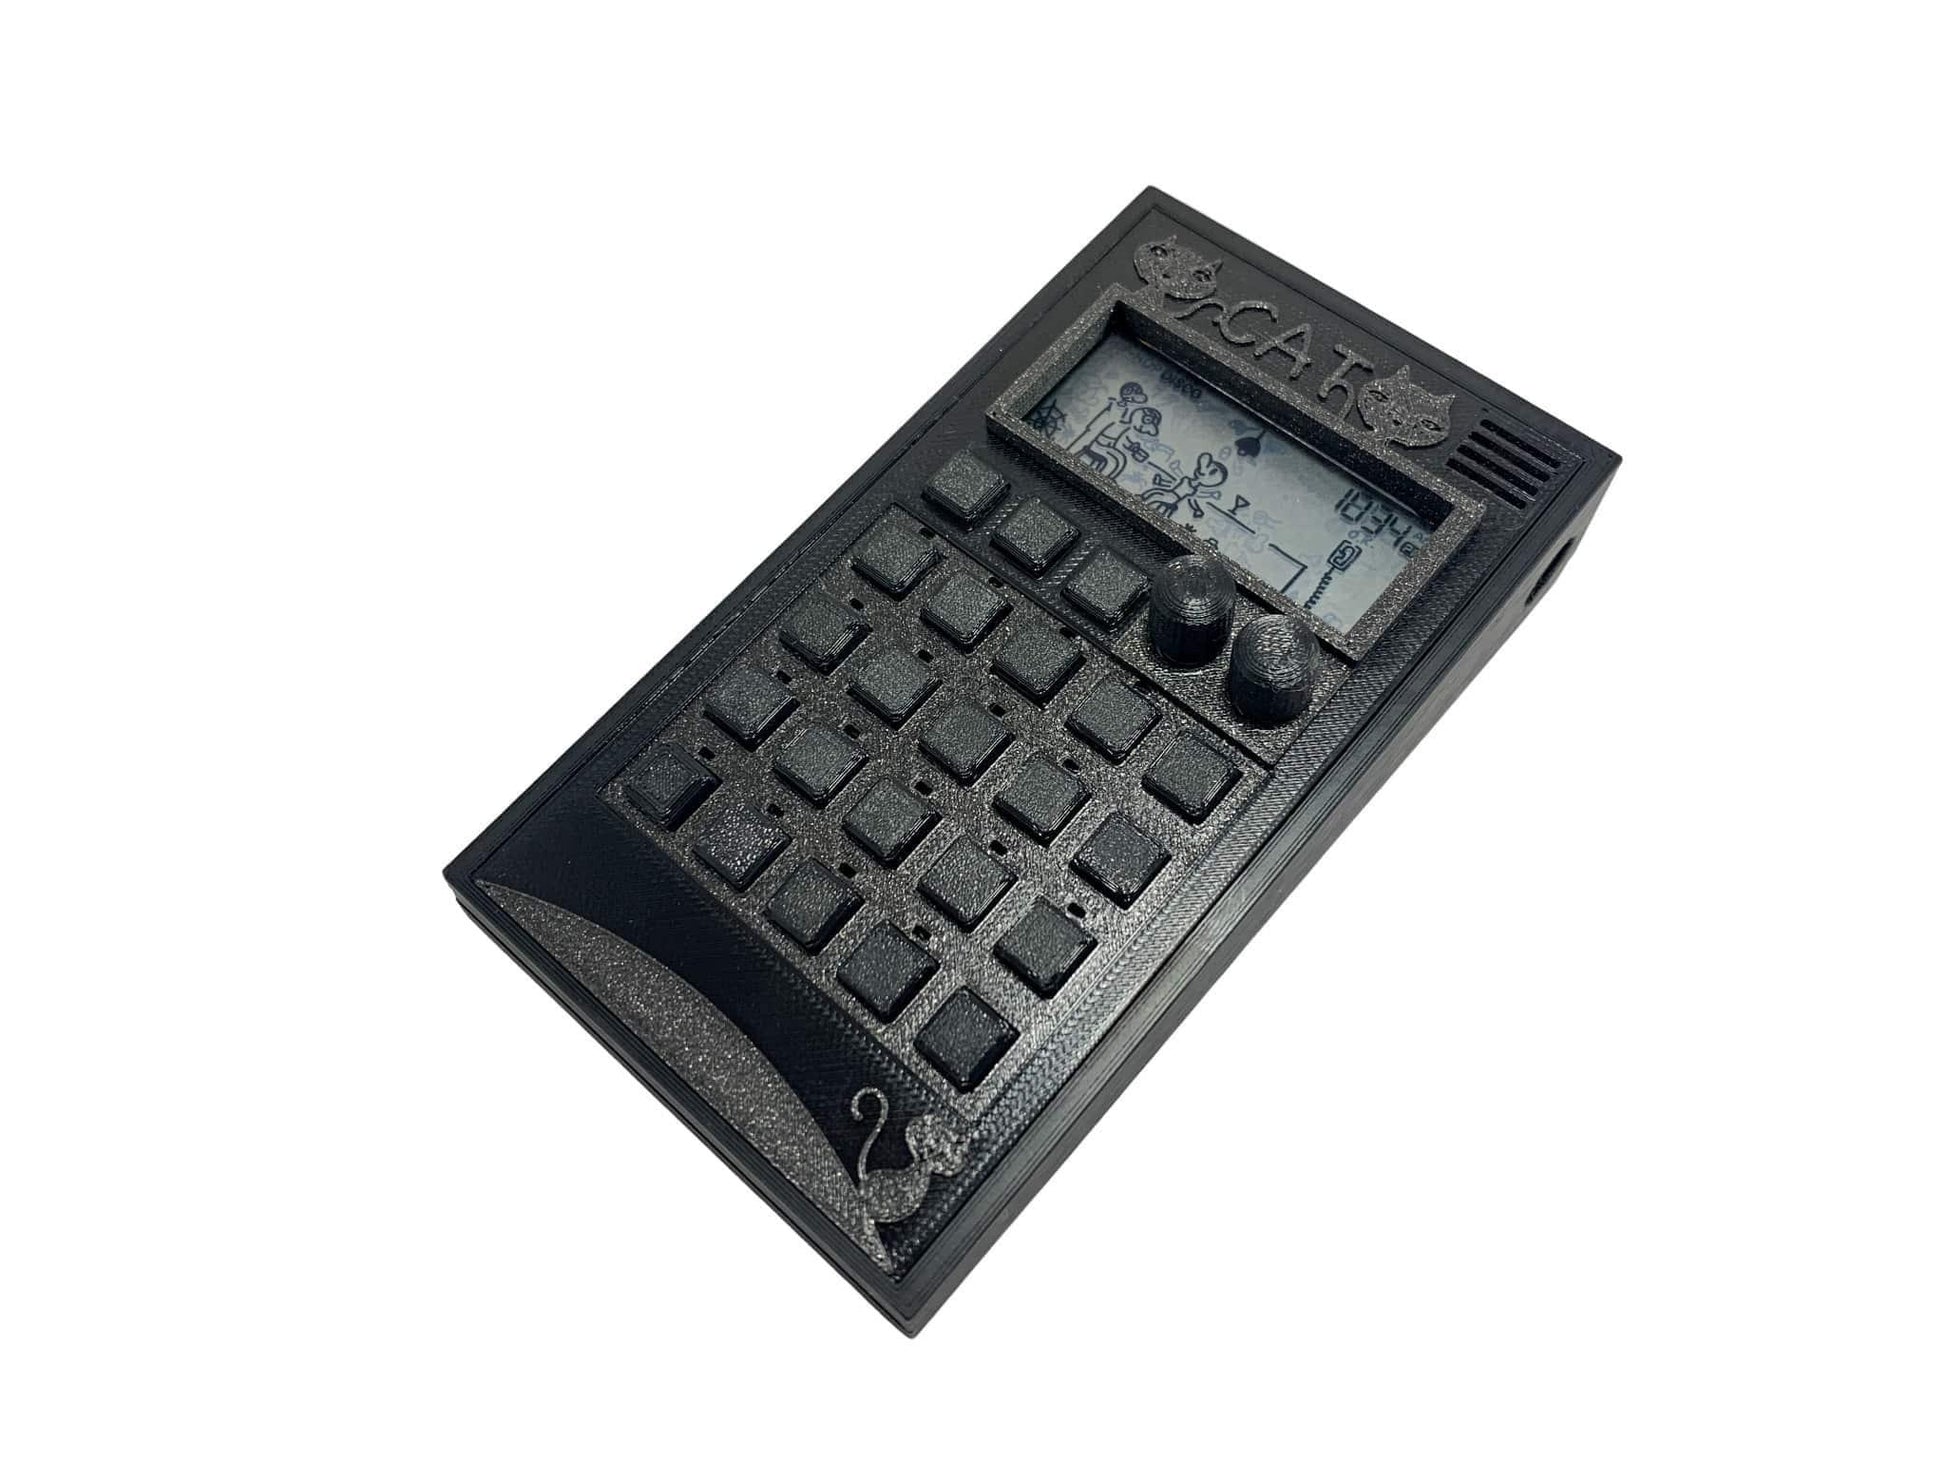 Night Cat - 3D printed case for Pocket Operator